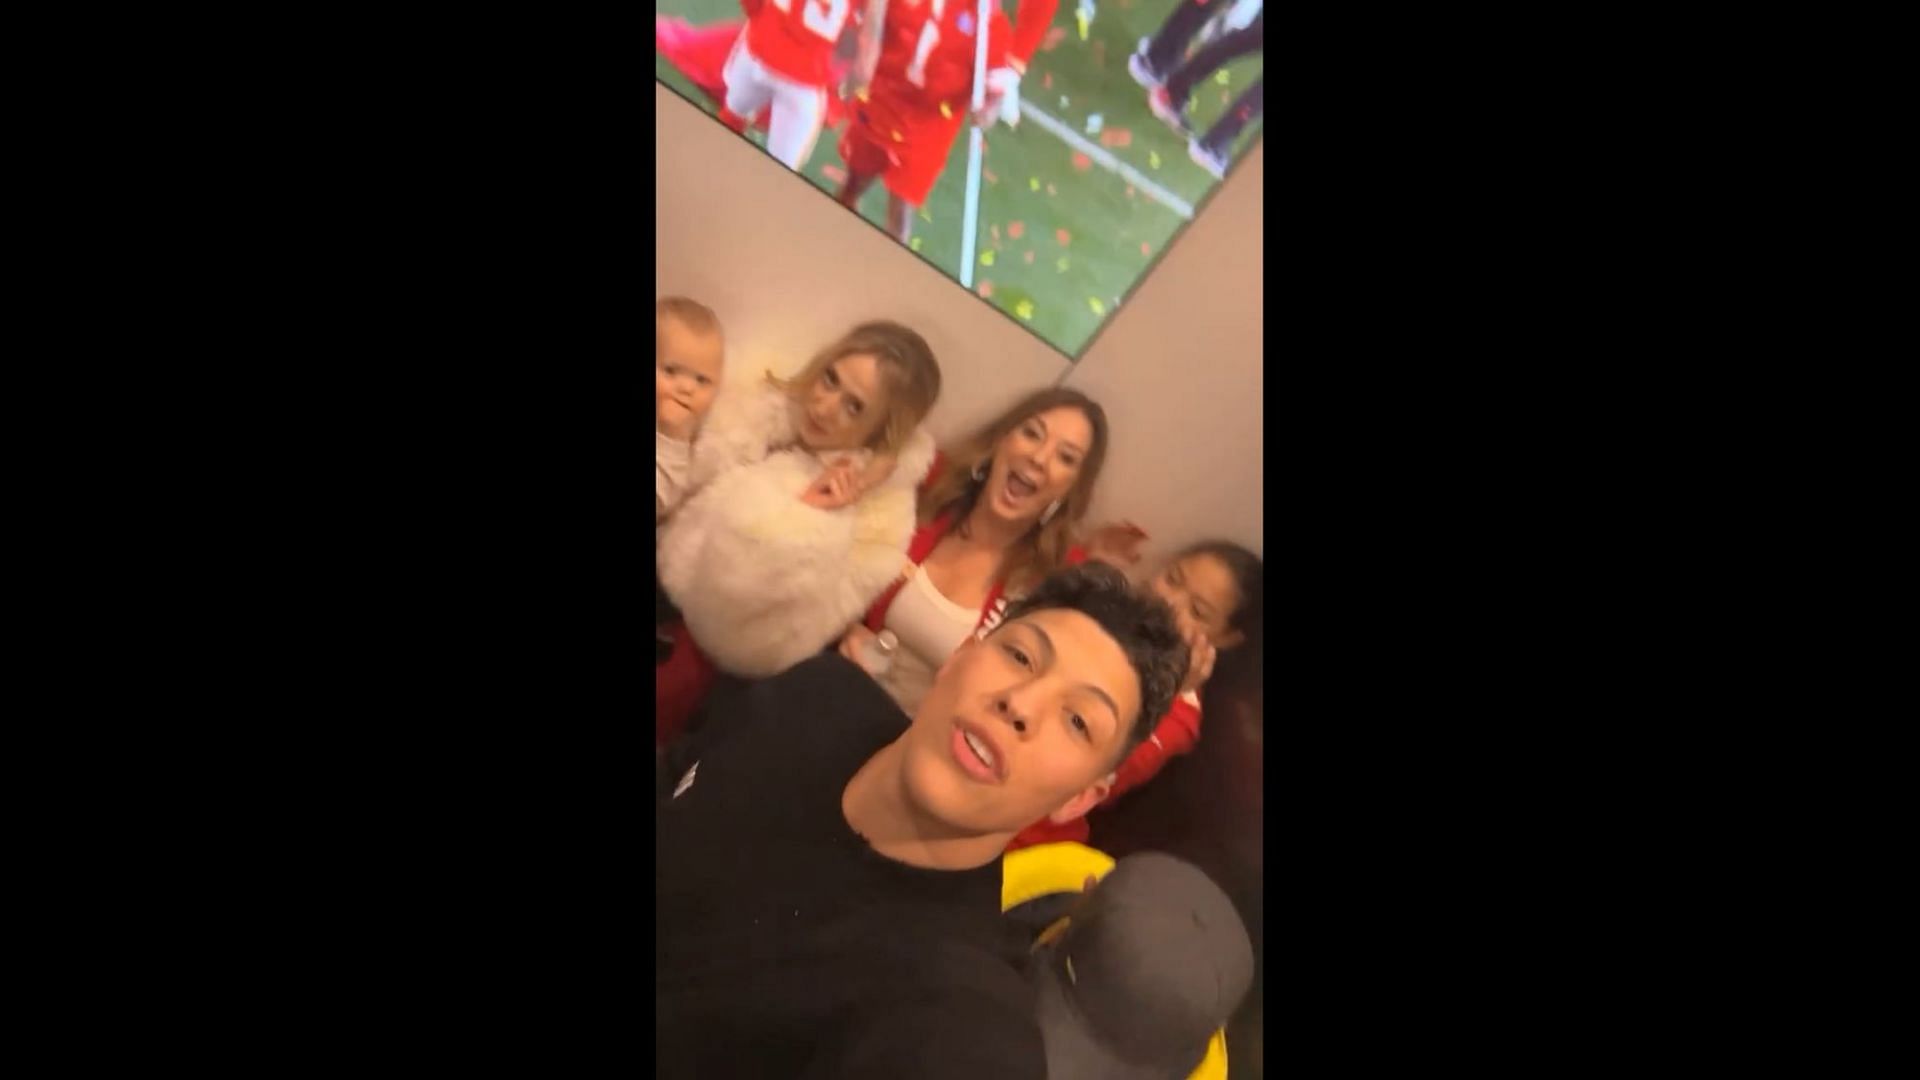 Patrick Mahomes' mother Randi and younger brother Jackson elated after the Chiefs attain consecutive Lombardi Trophies